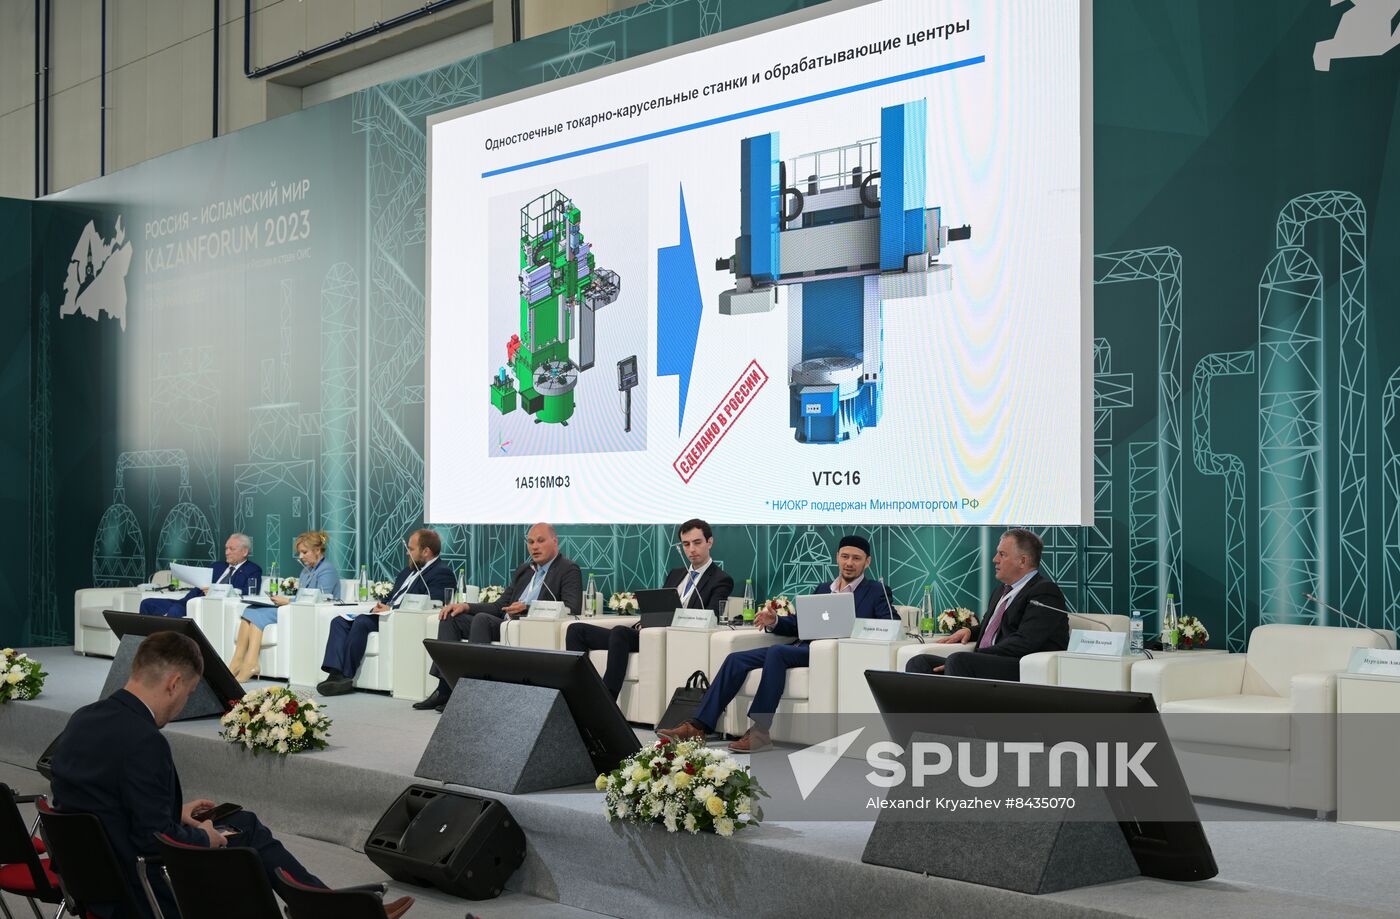 KAZANFORUM 2023. Current Challenges in the Field of Machine Tool Construction and Heavy Engineering